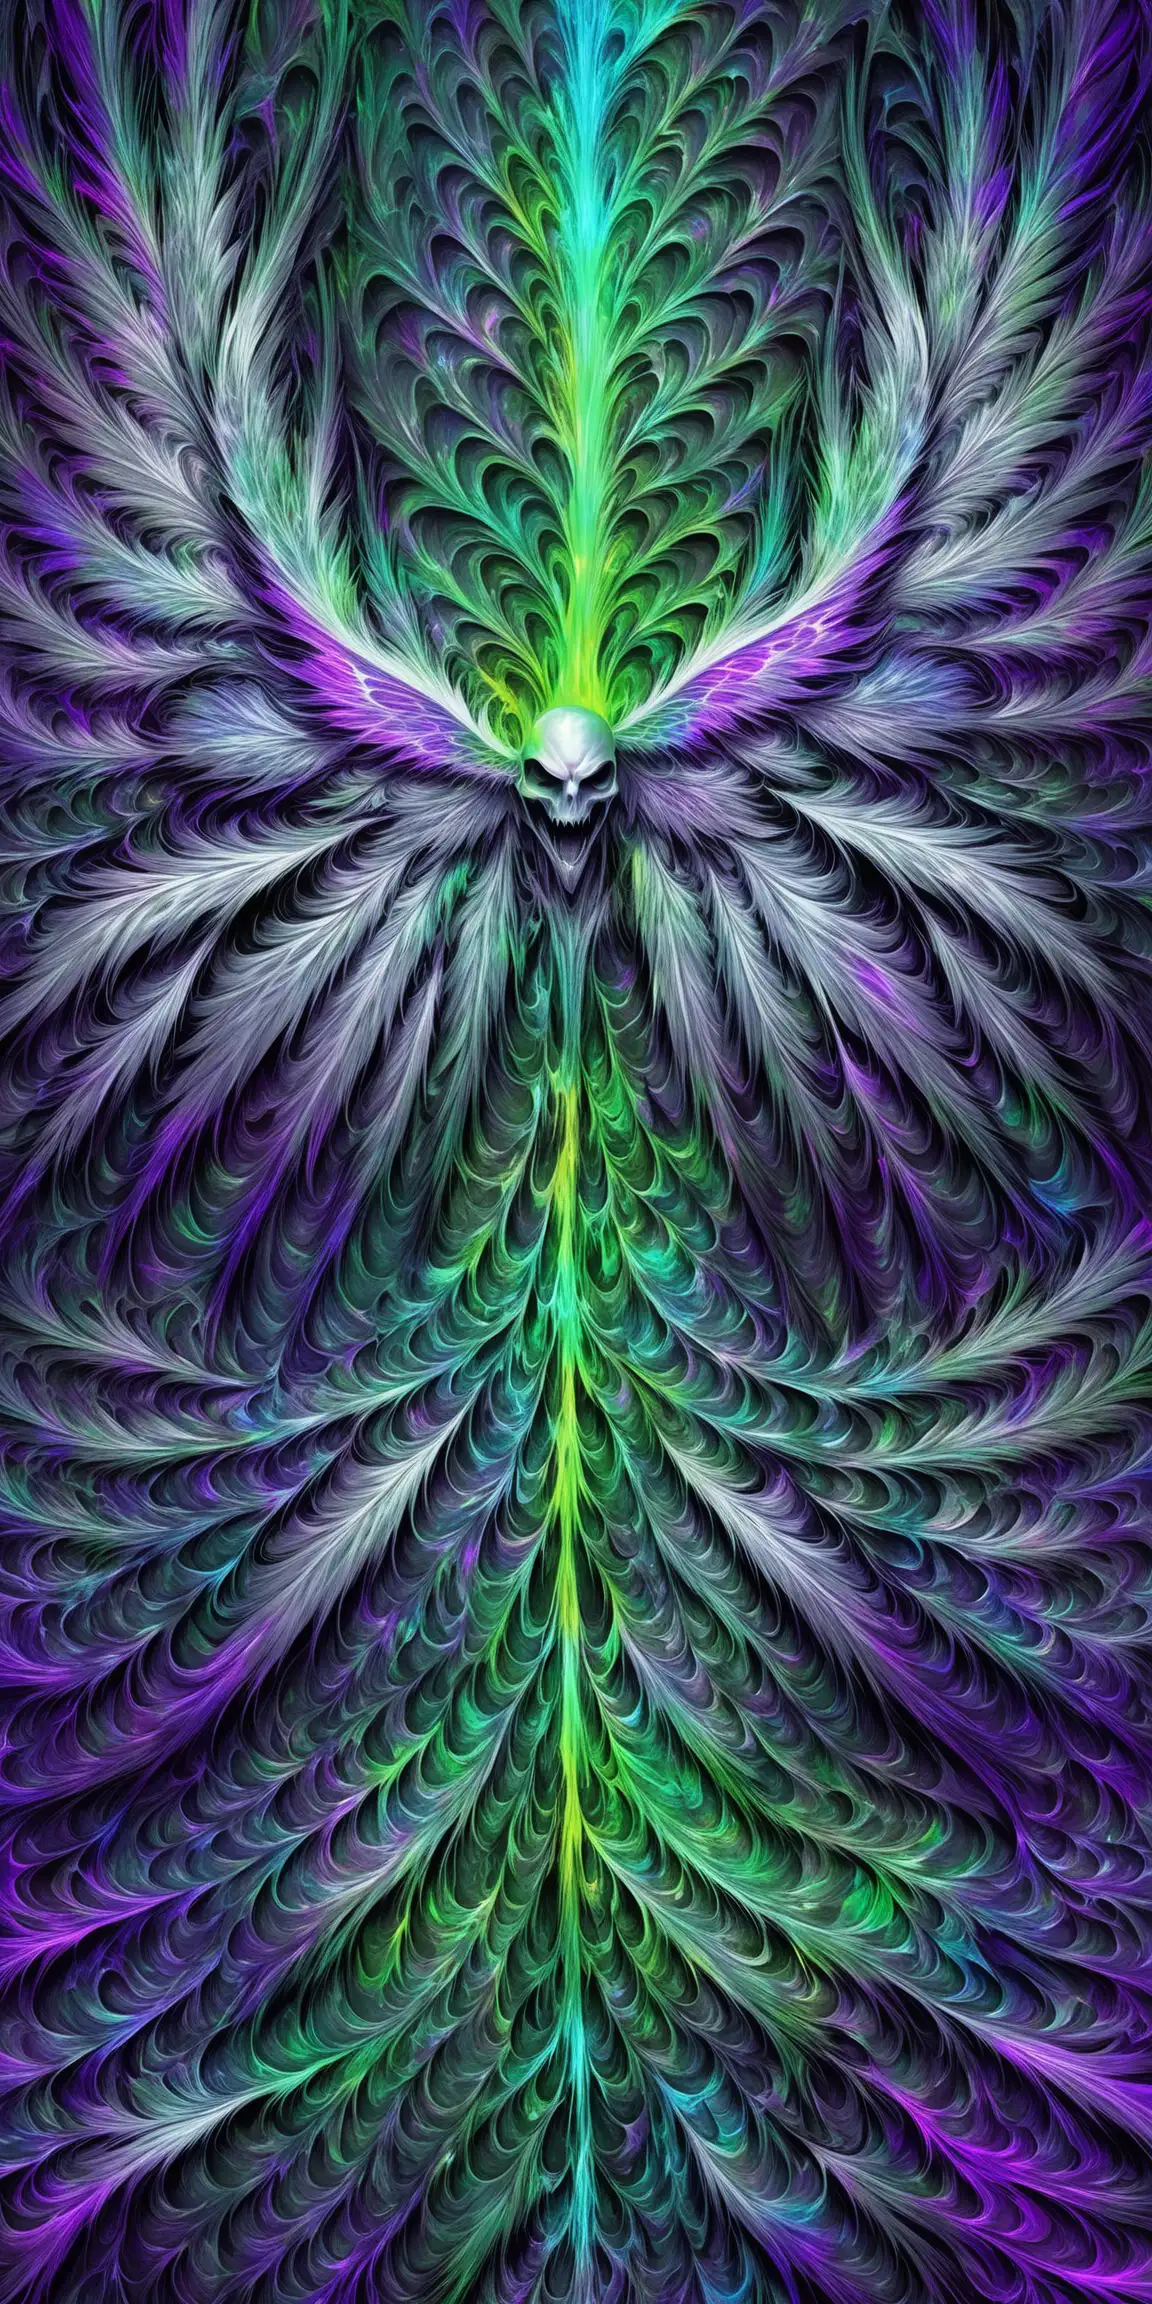 abstract wallpaper. silver, iridescent, chrome wings and feather indentations. of lightning. green hints of nature. minor hint of purple. slight neon blue. marble. fractal. no humans. surreal. splash art. pour paint. vampire themed. multi-depths.